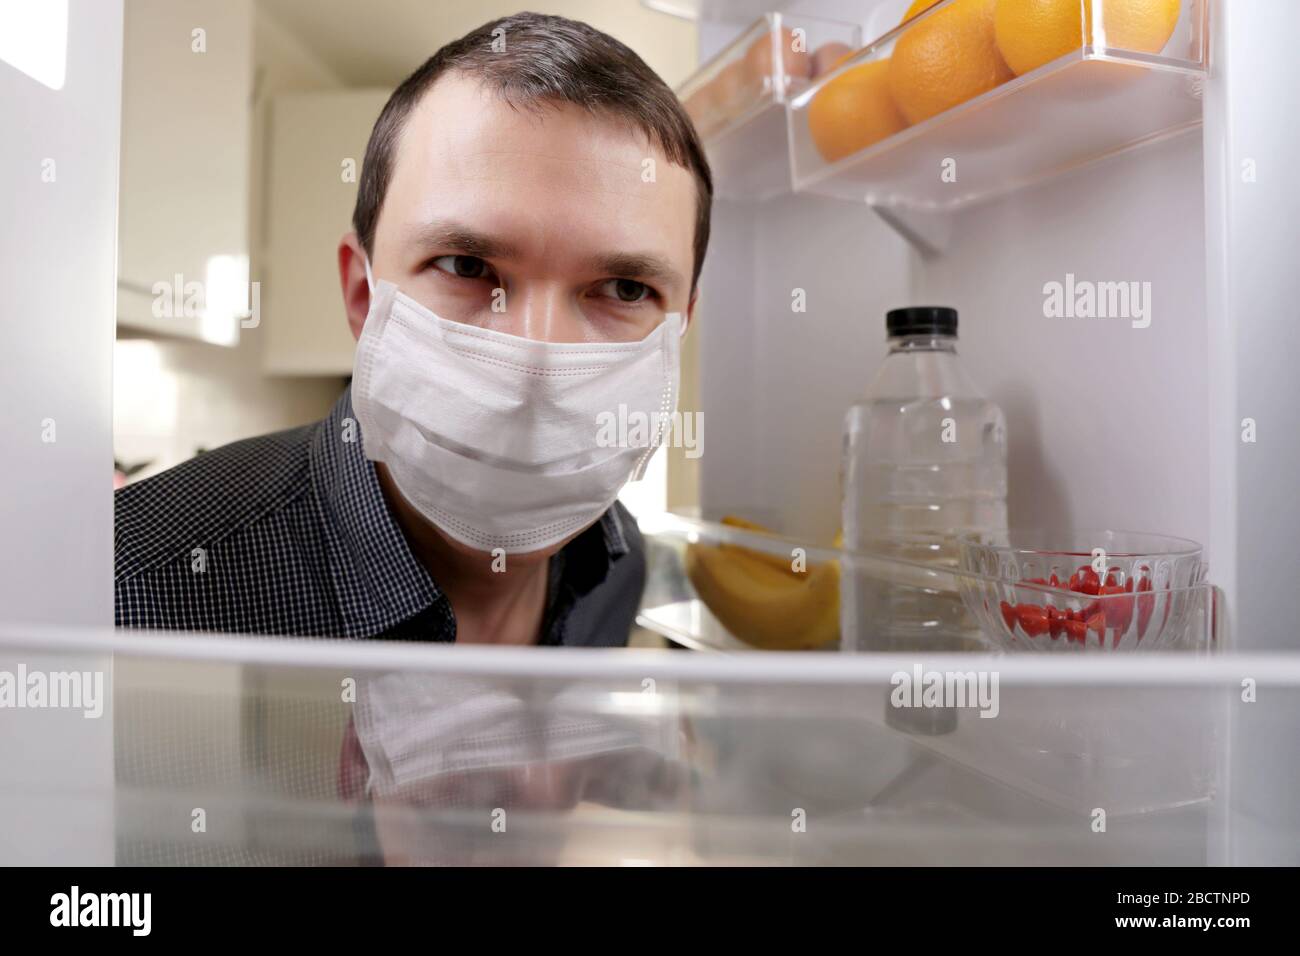 Man in a medical mask looks into the fridge with food. Concept of diet, obesity during home quarantine at covid-19 coronavirus pandemic Stock Photo